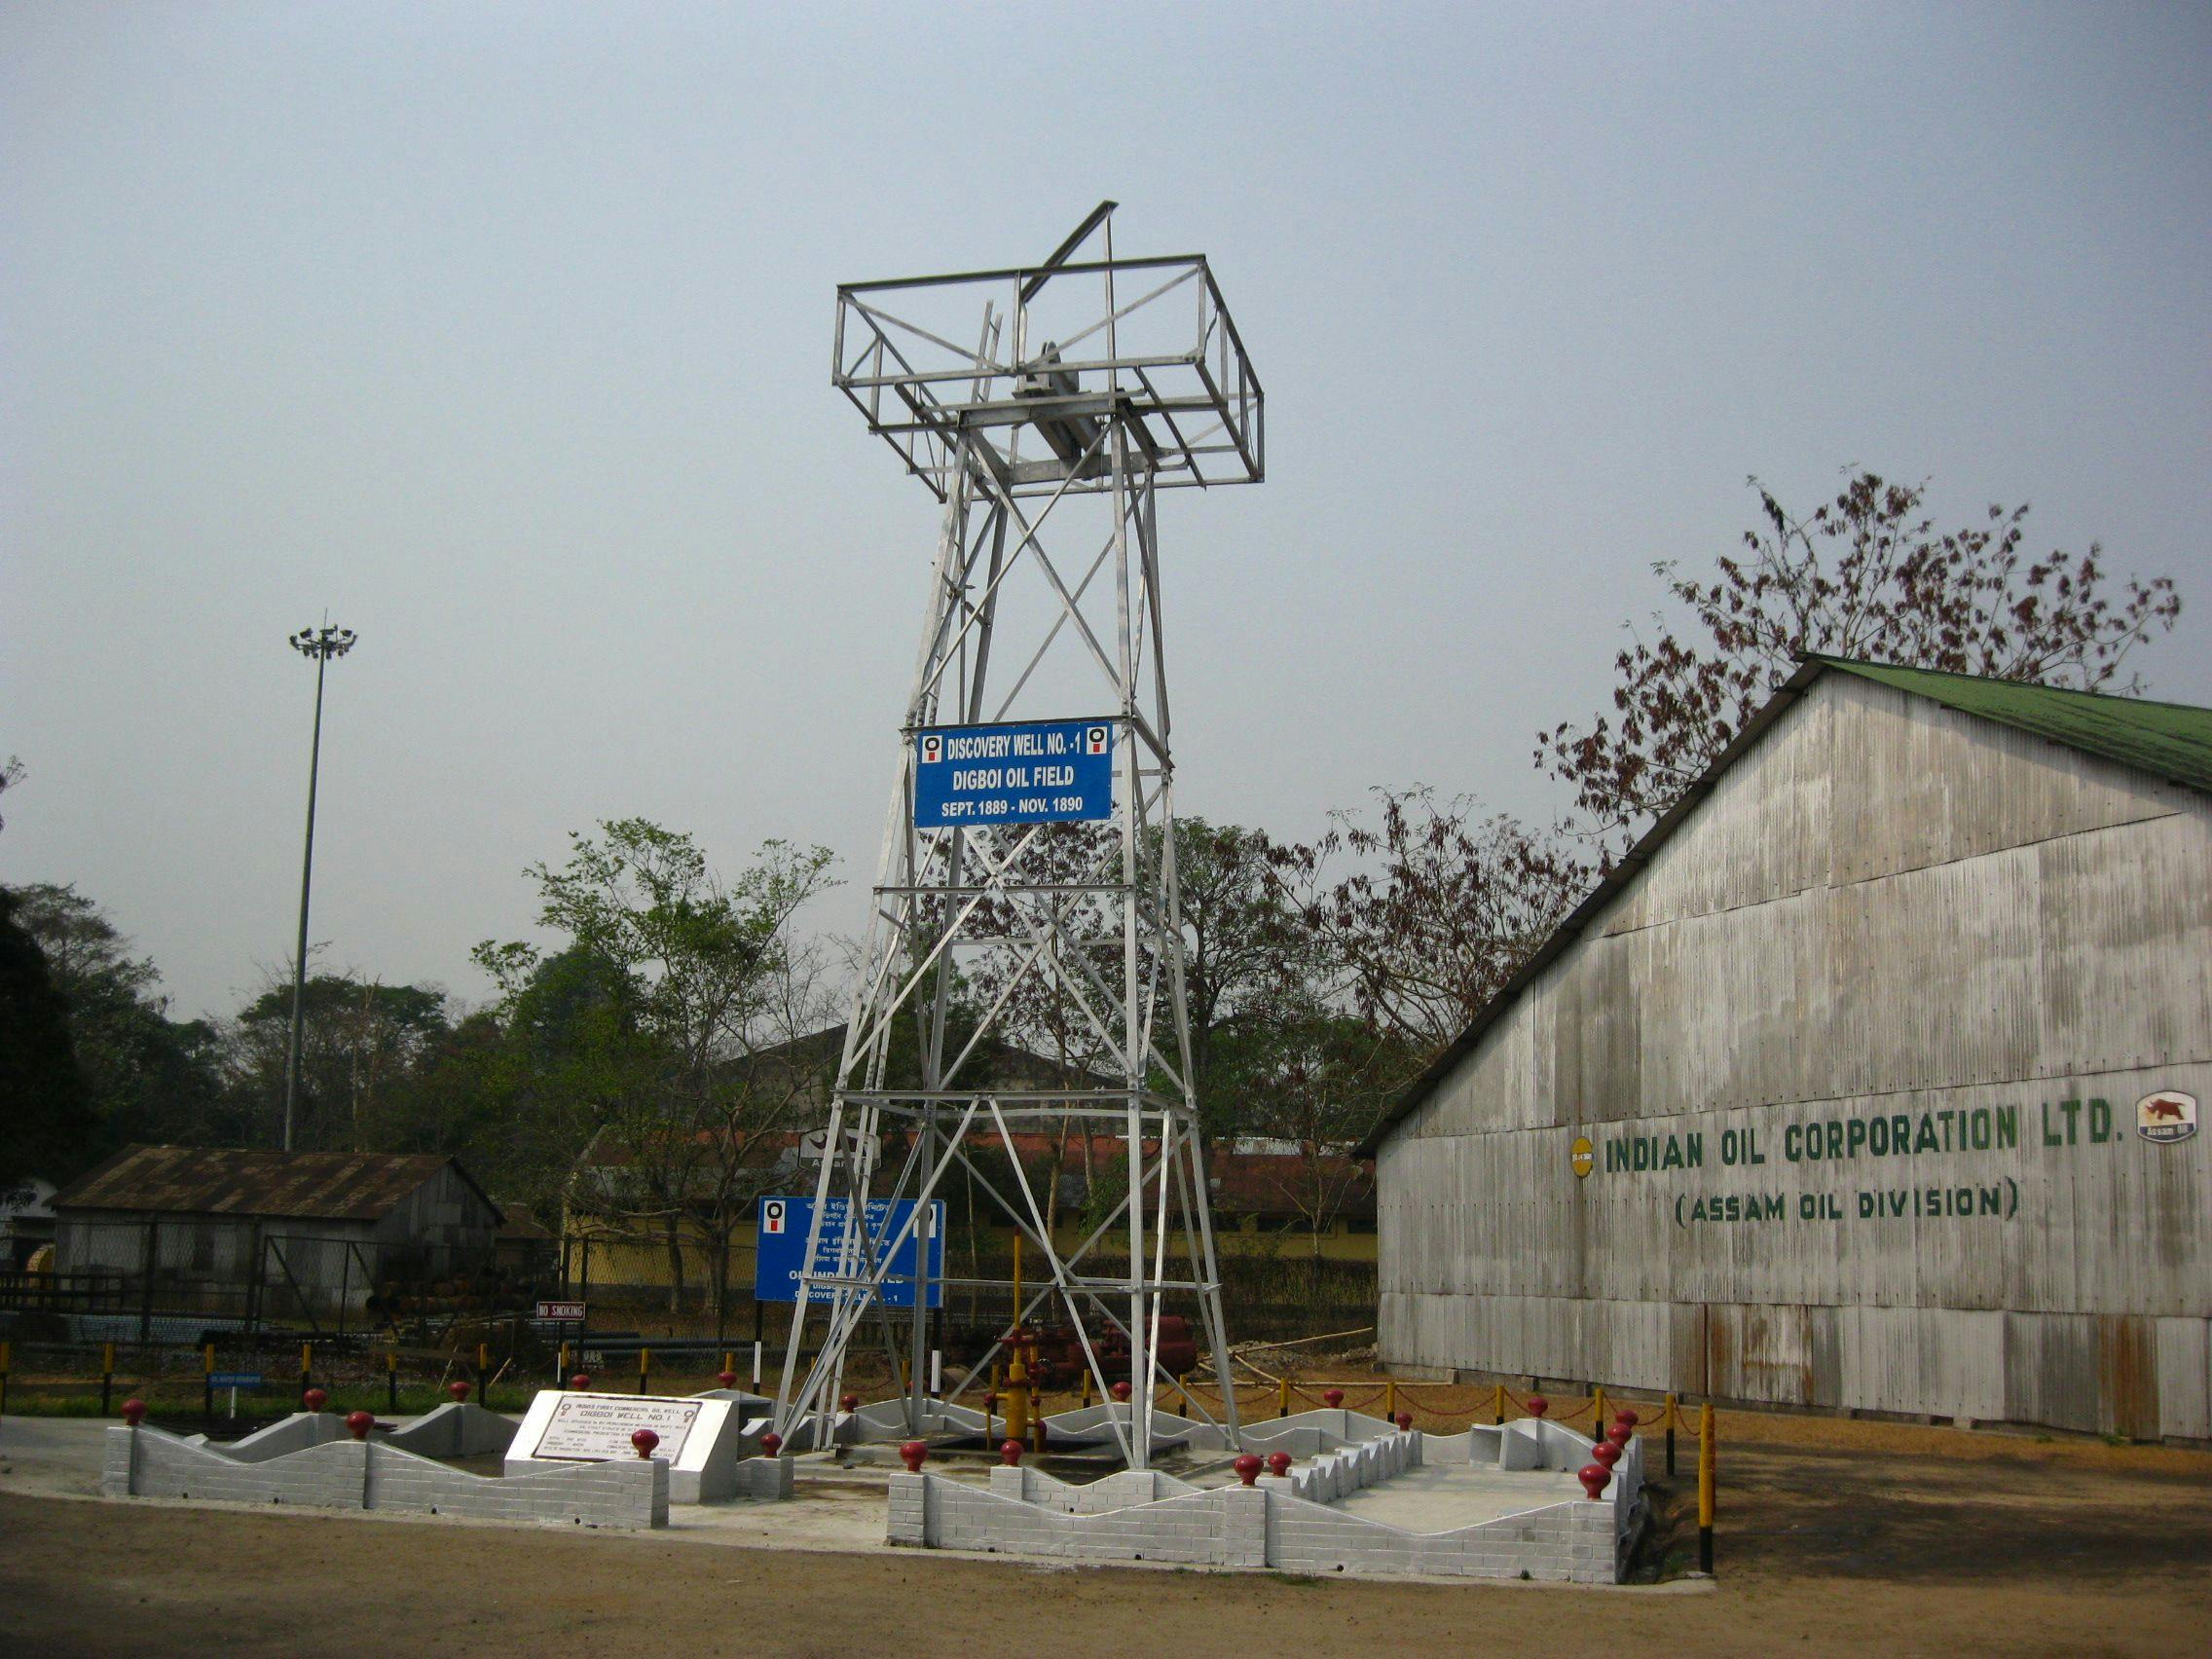 The site of India’s first commercial oil well